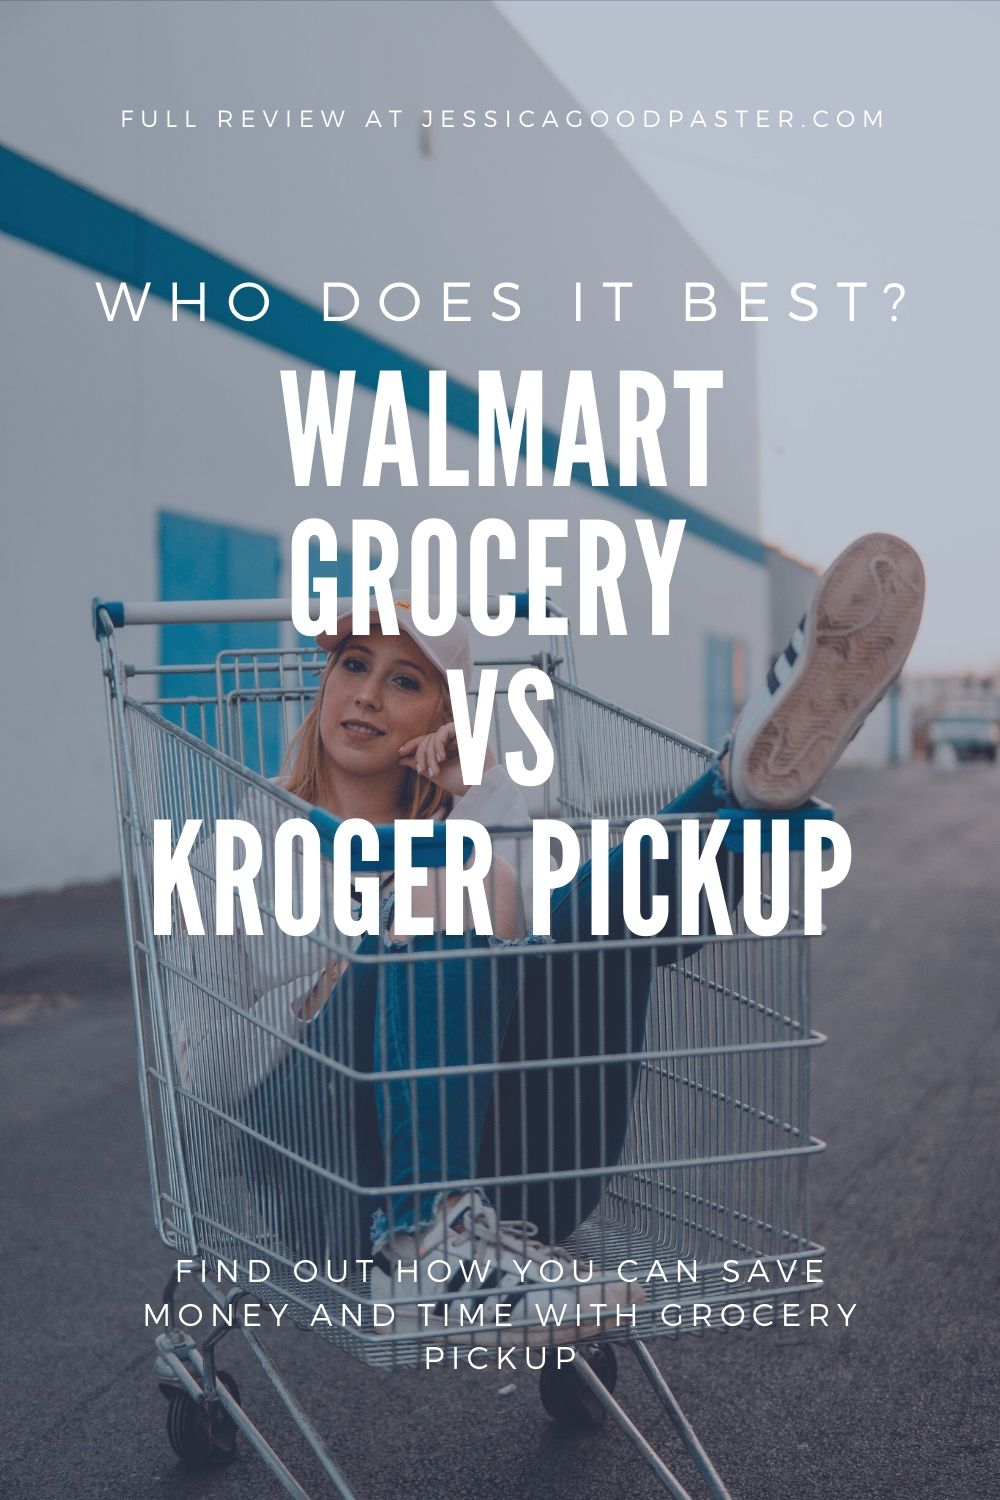 Who Does Grocery Pickup Best? Walmart Grocery vs. Kroger ClickList | Read more for a comparison of popular grocery pickup programs from Walmart and Kroger. Find out which one saves you the most money and time! jessicagoodpaster.com | #groceries #budget #money #food #shoppingonline #shopping #momhacks